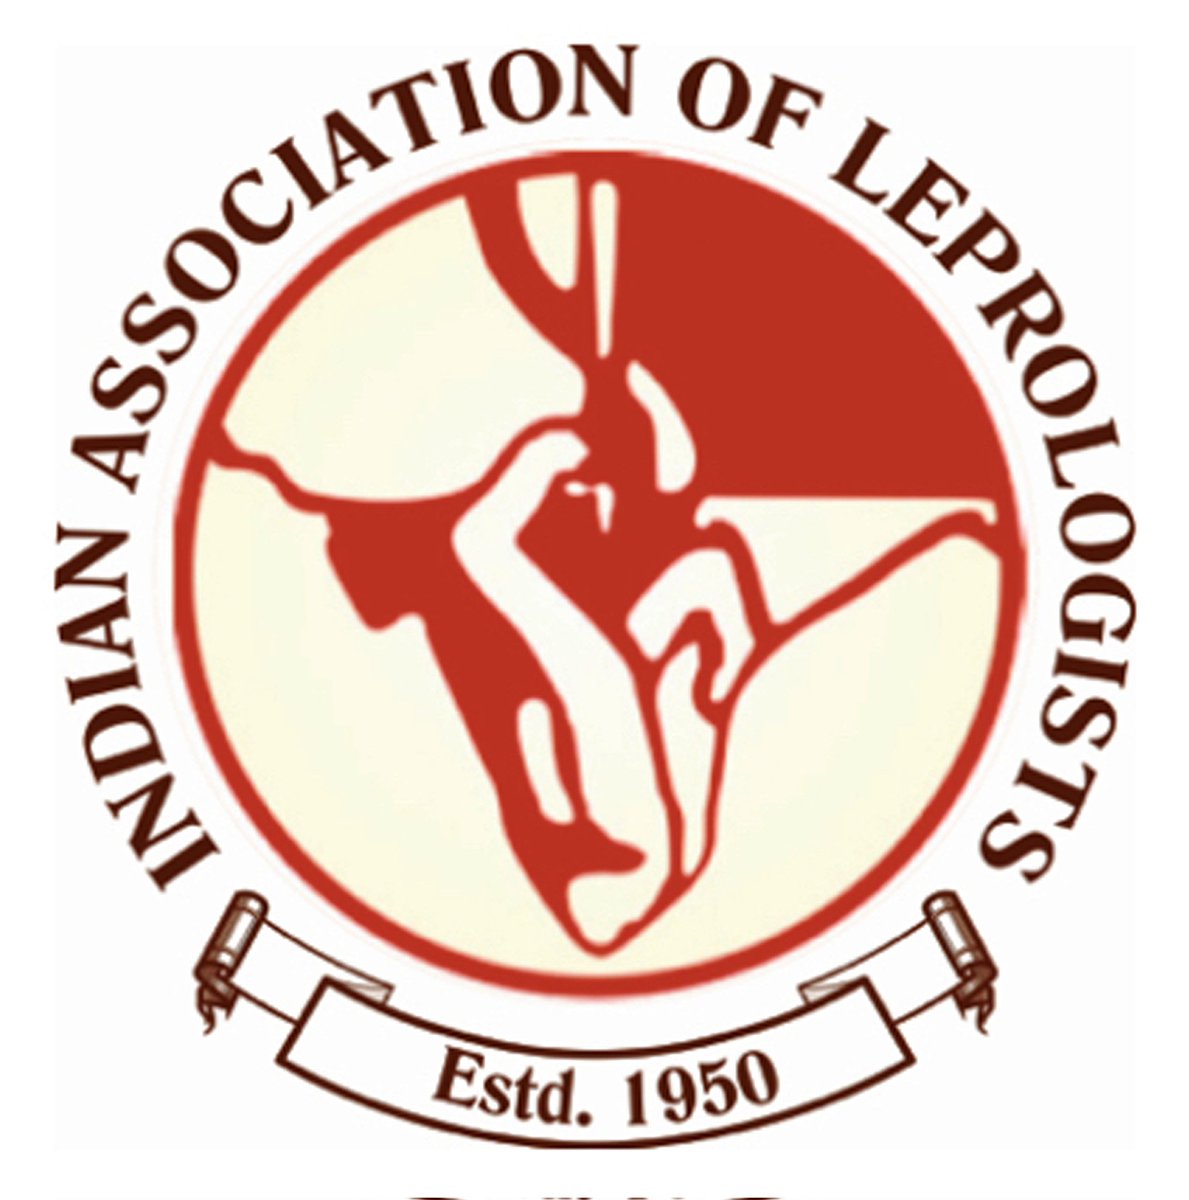 Indian Association of Leprosy also observing world leprosy day (28th January) & India Anti-leprosy day (30th January). We shall be happy to collaborate with all NGOs working for the cause and try to reach affected communities.